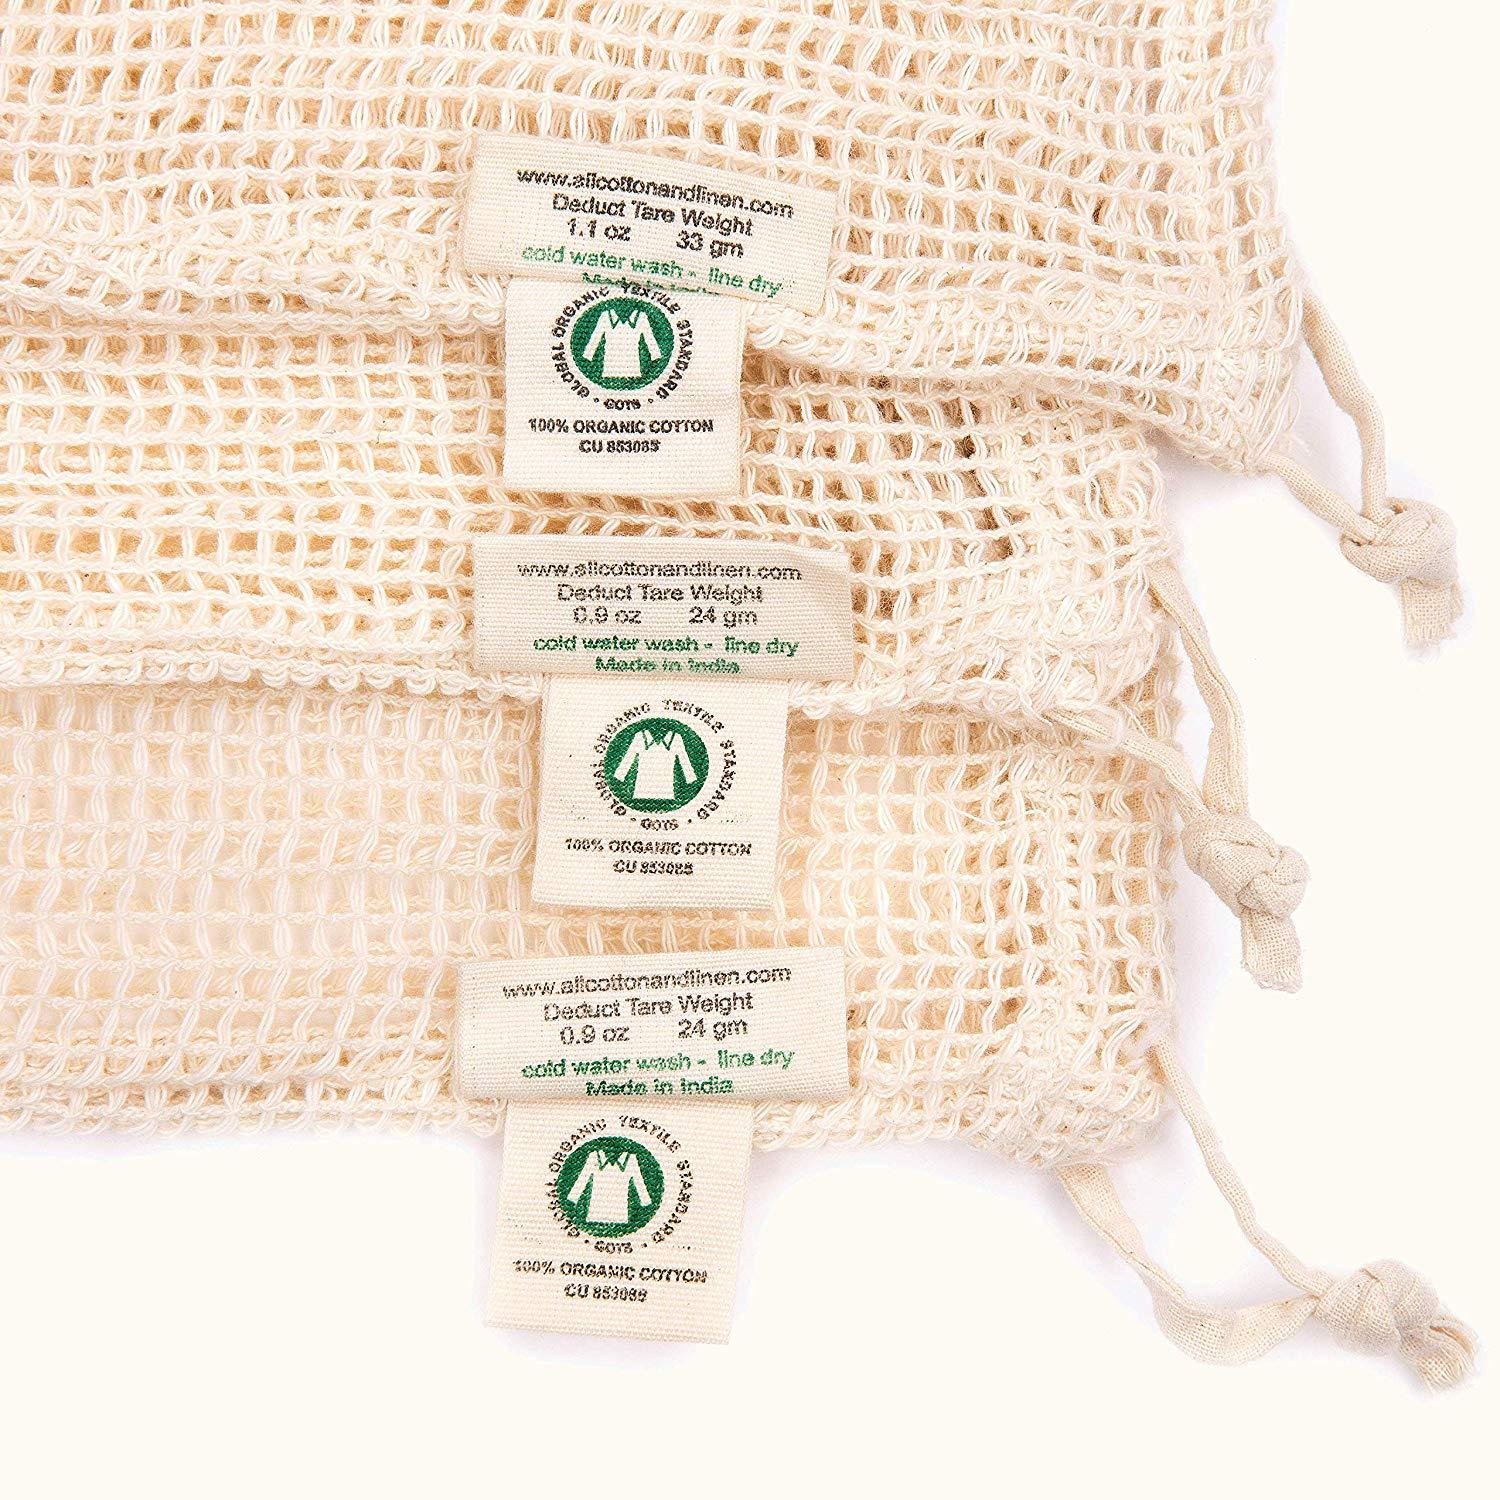 Organic Cotton Grocery Bags for Zero Waste Shopping, Lightweight & Drawstring 2